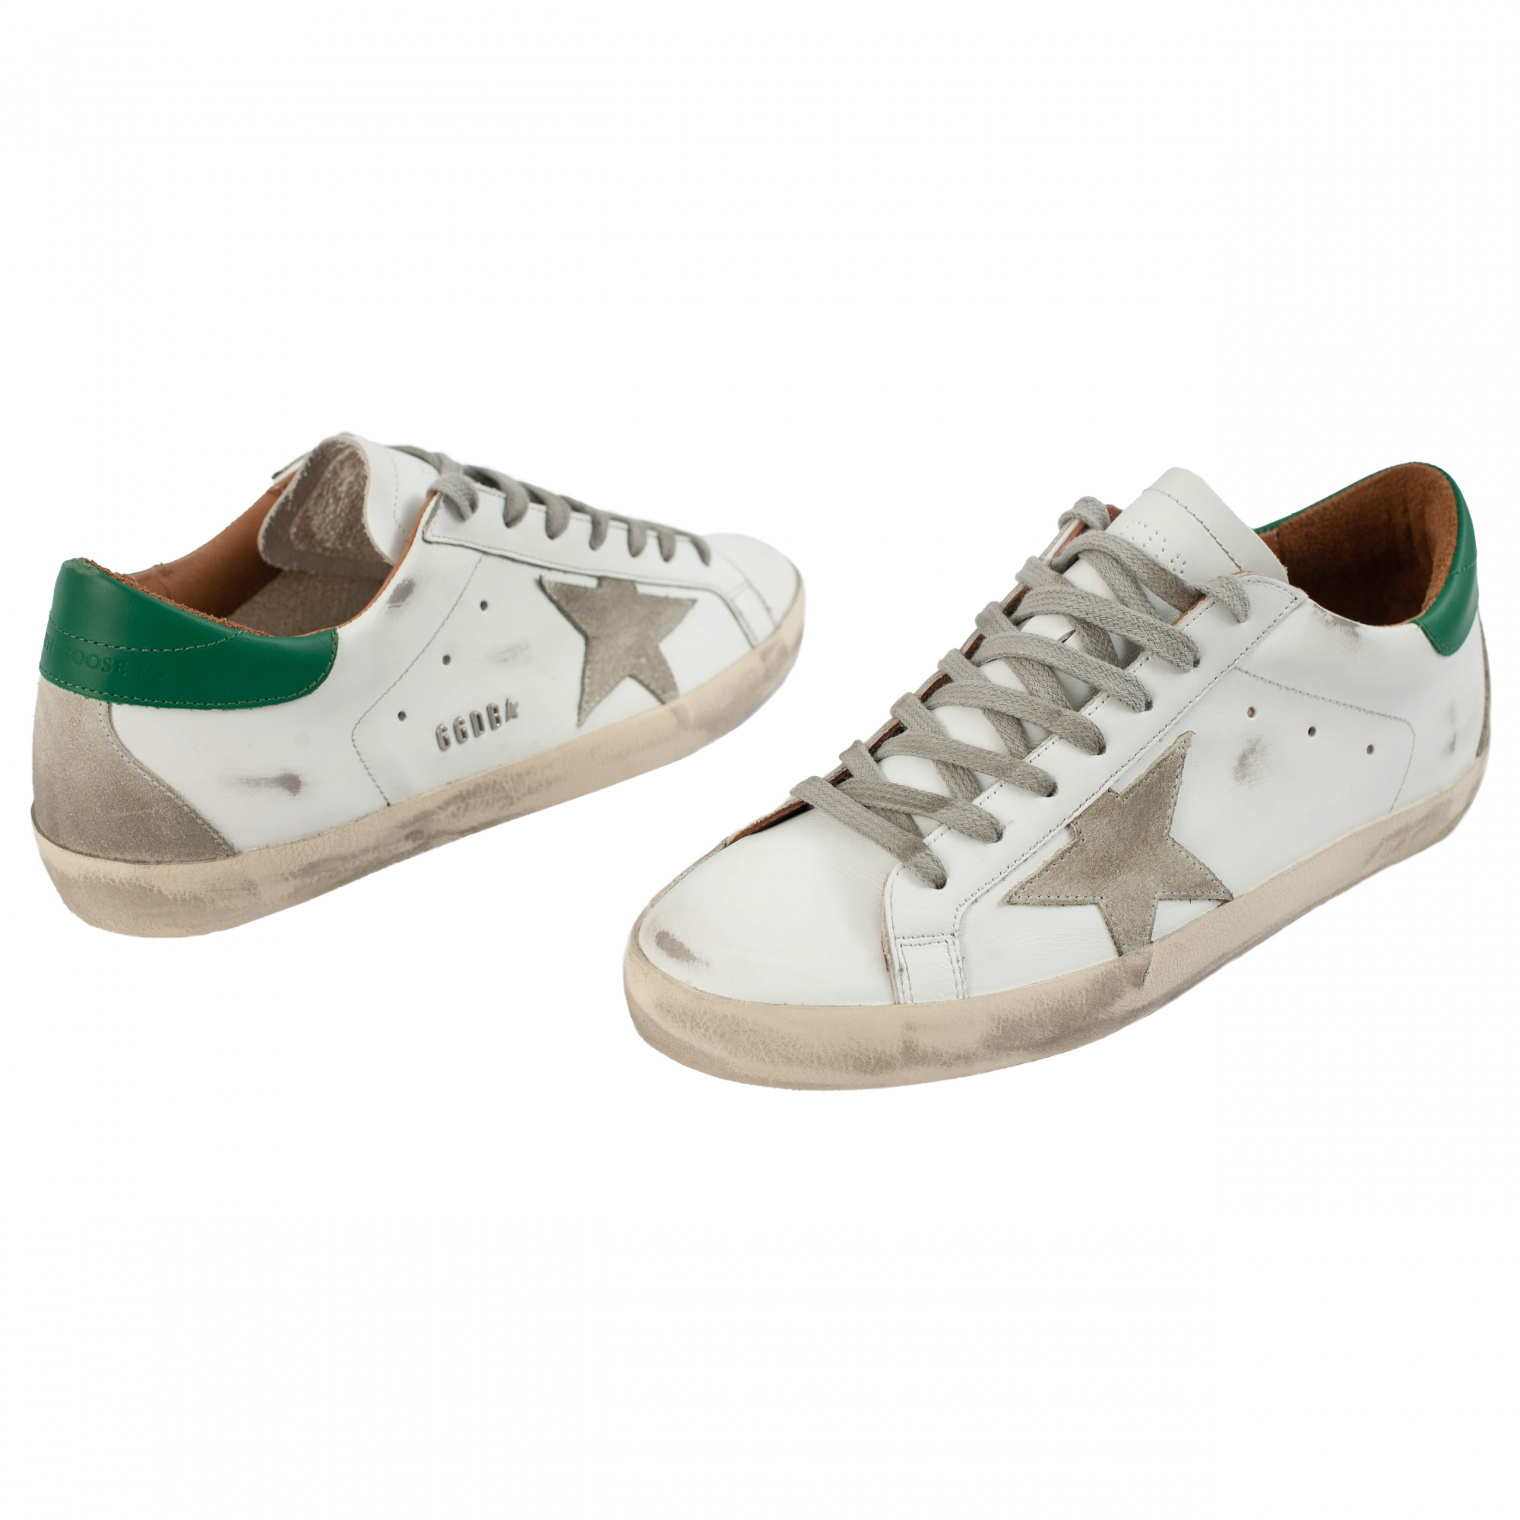 Golden Goose Superstar White Leather Sneakers